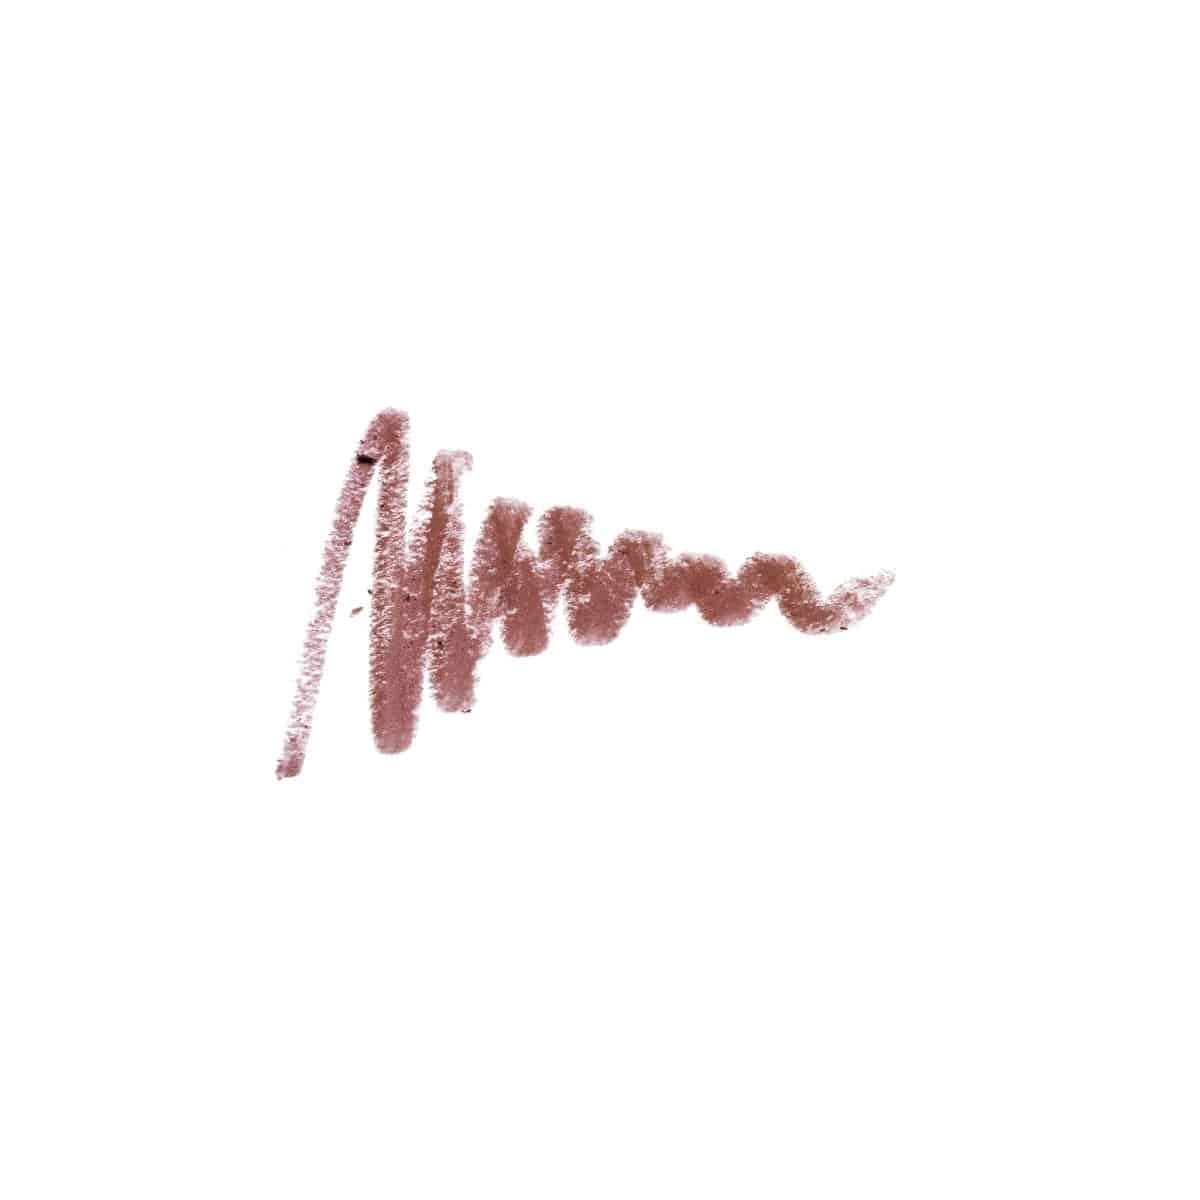 Certified Organic Lipstick Crayon - RUTHERFORD & Co